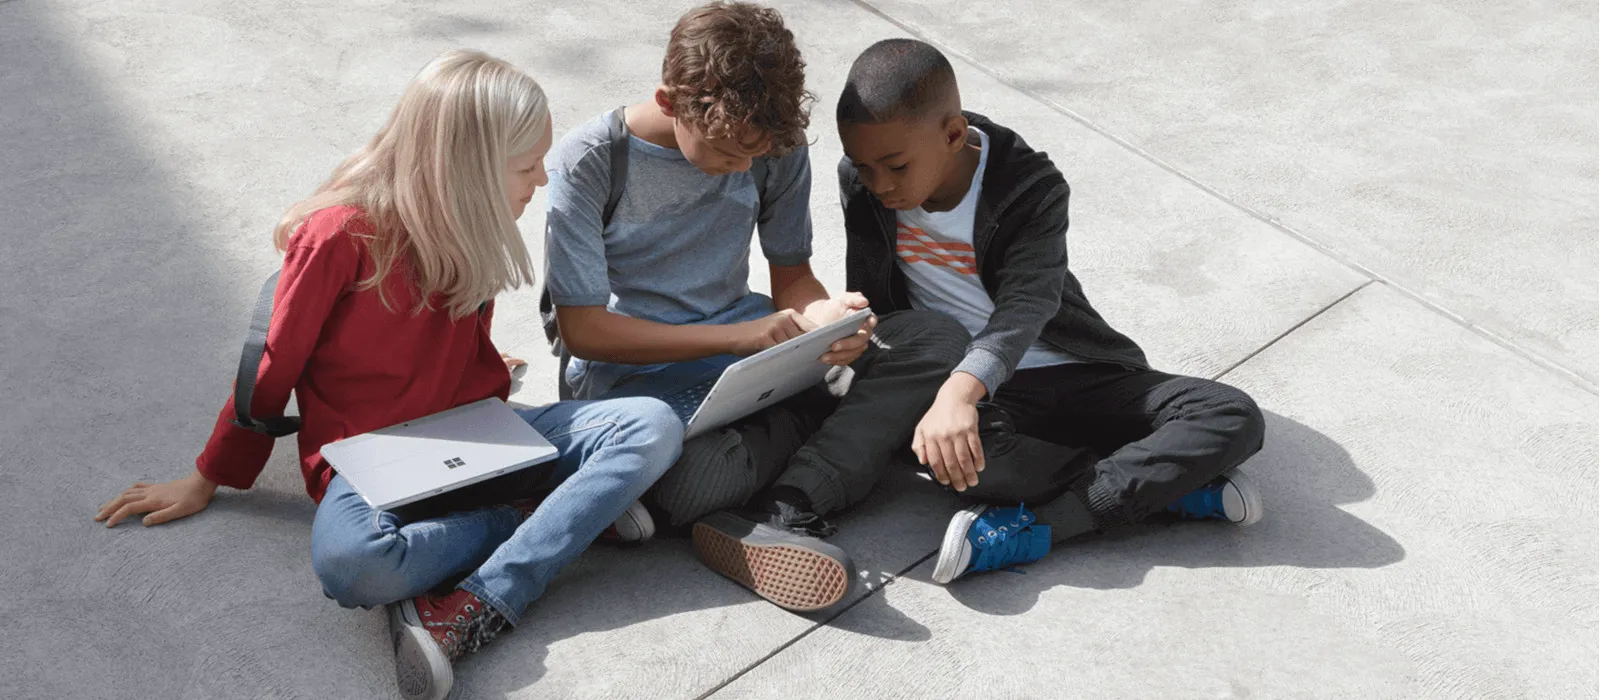 Three children sit in the schoolyard and look together at the screen of a Surface Go 